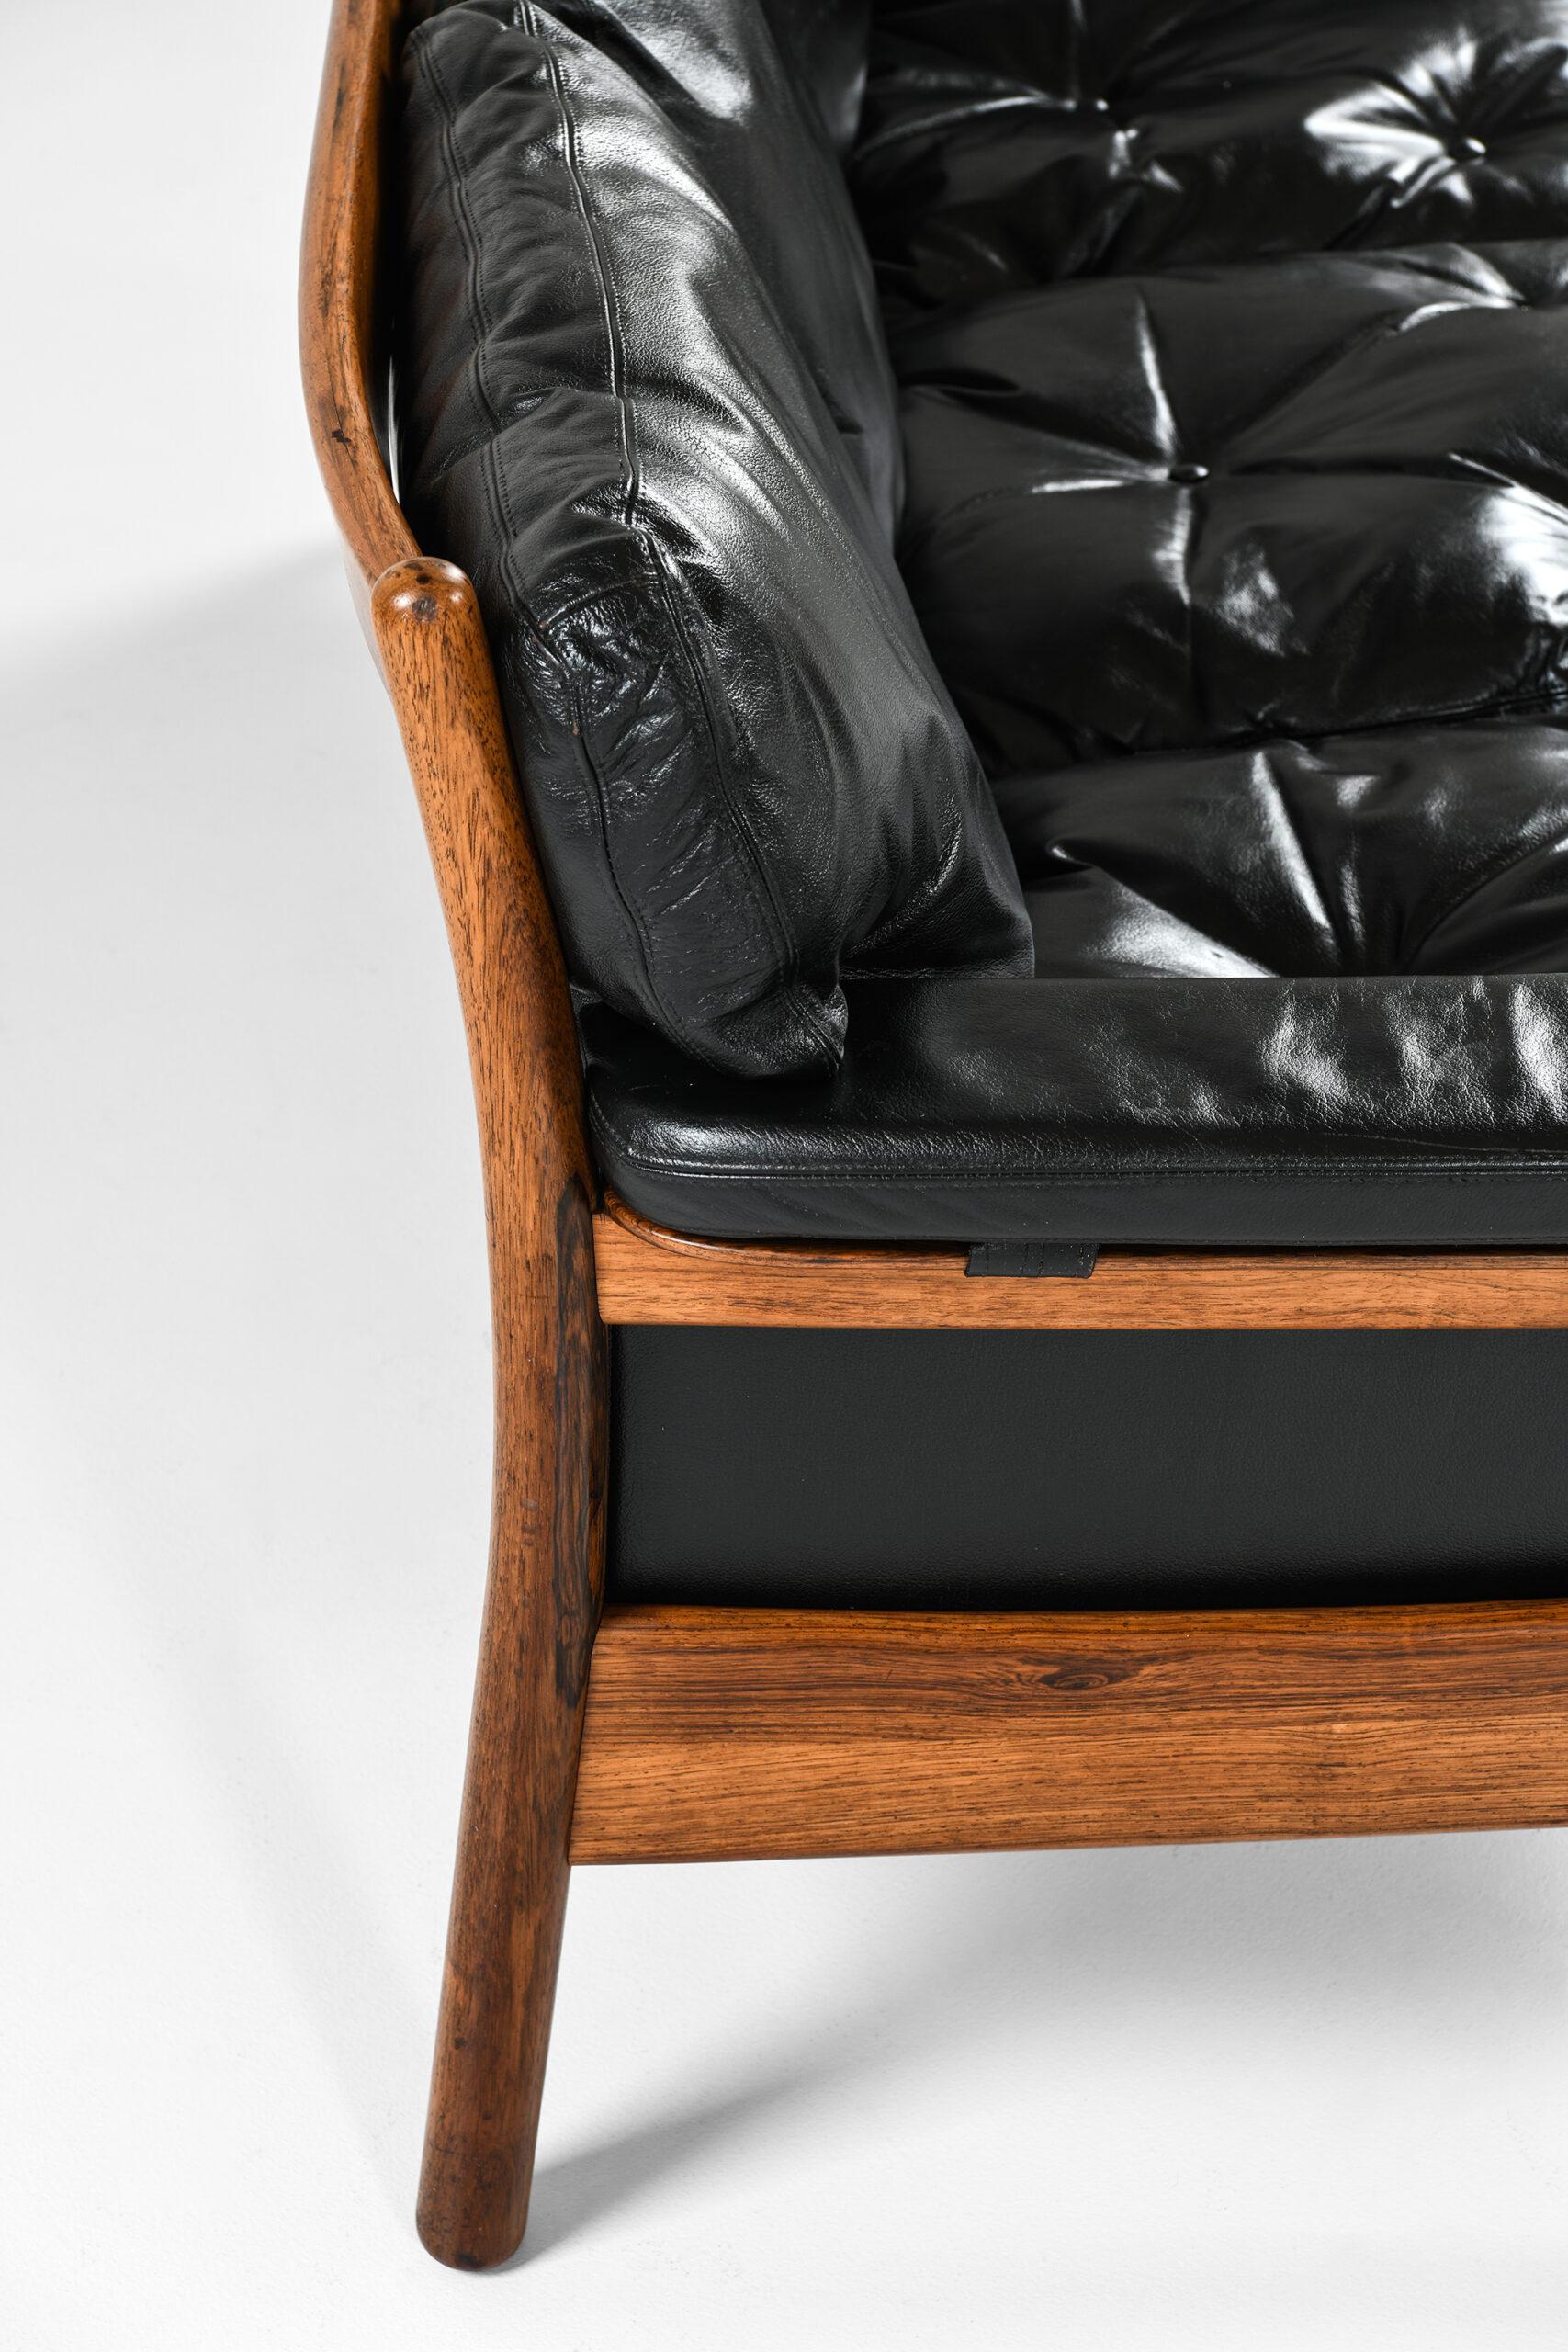 Leather Gunnar Myrstrand Sofa Produced by Källemo in Sweden For Sale